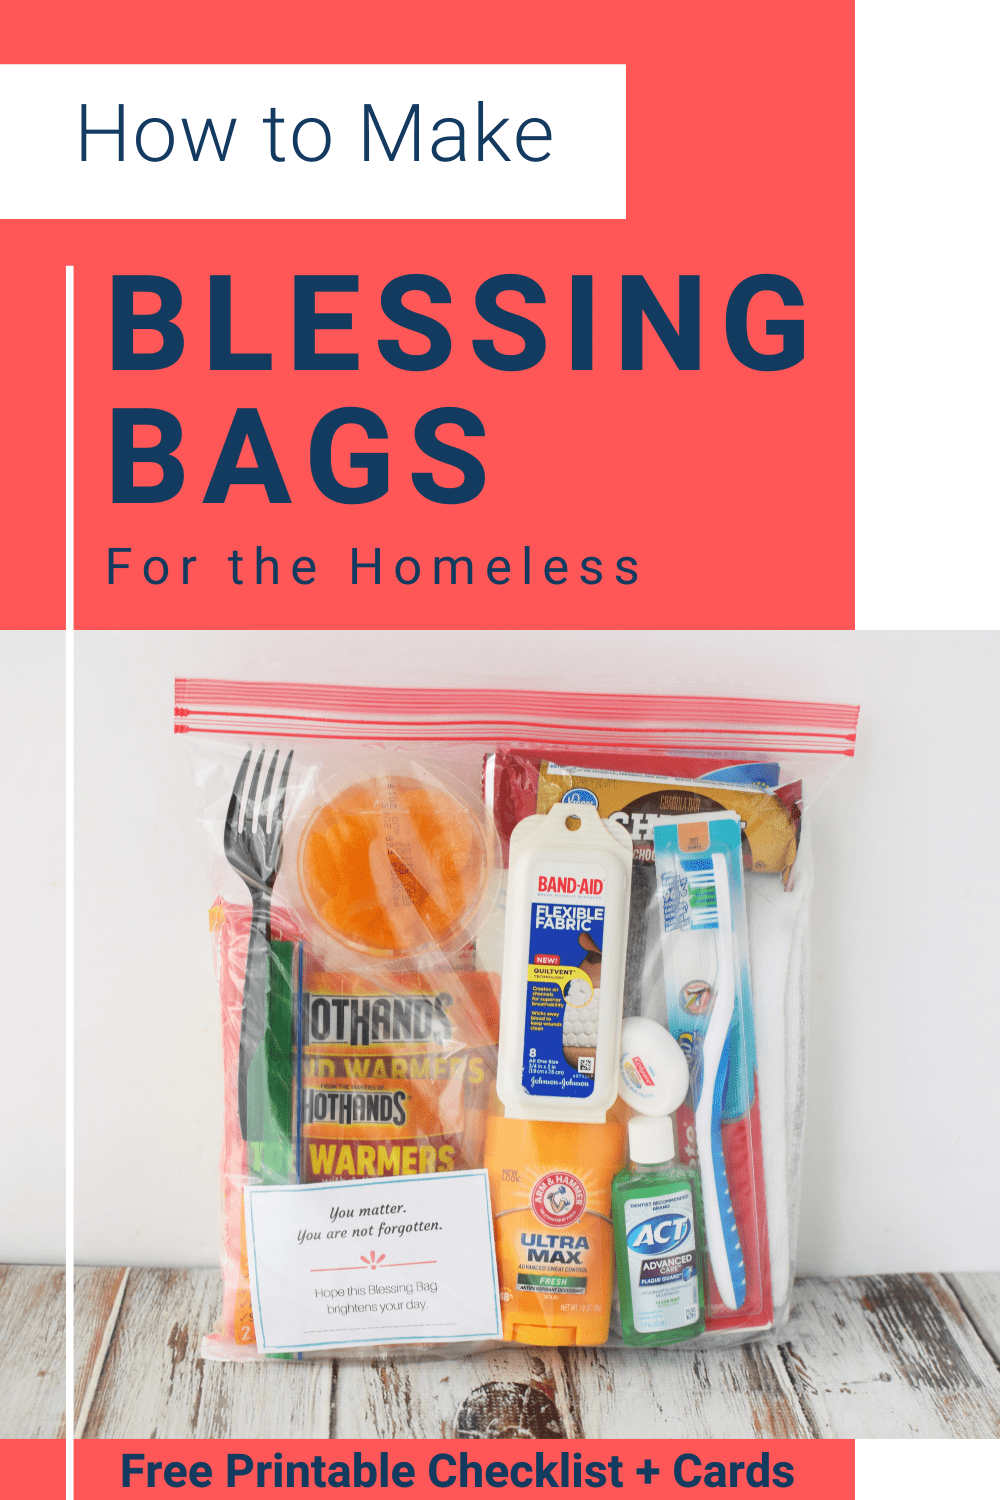 How to Make Blessing Bags For Those in Need